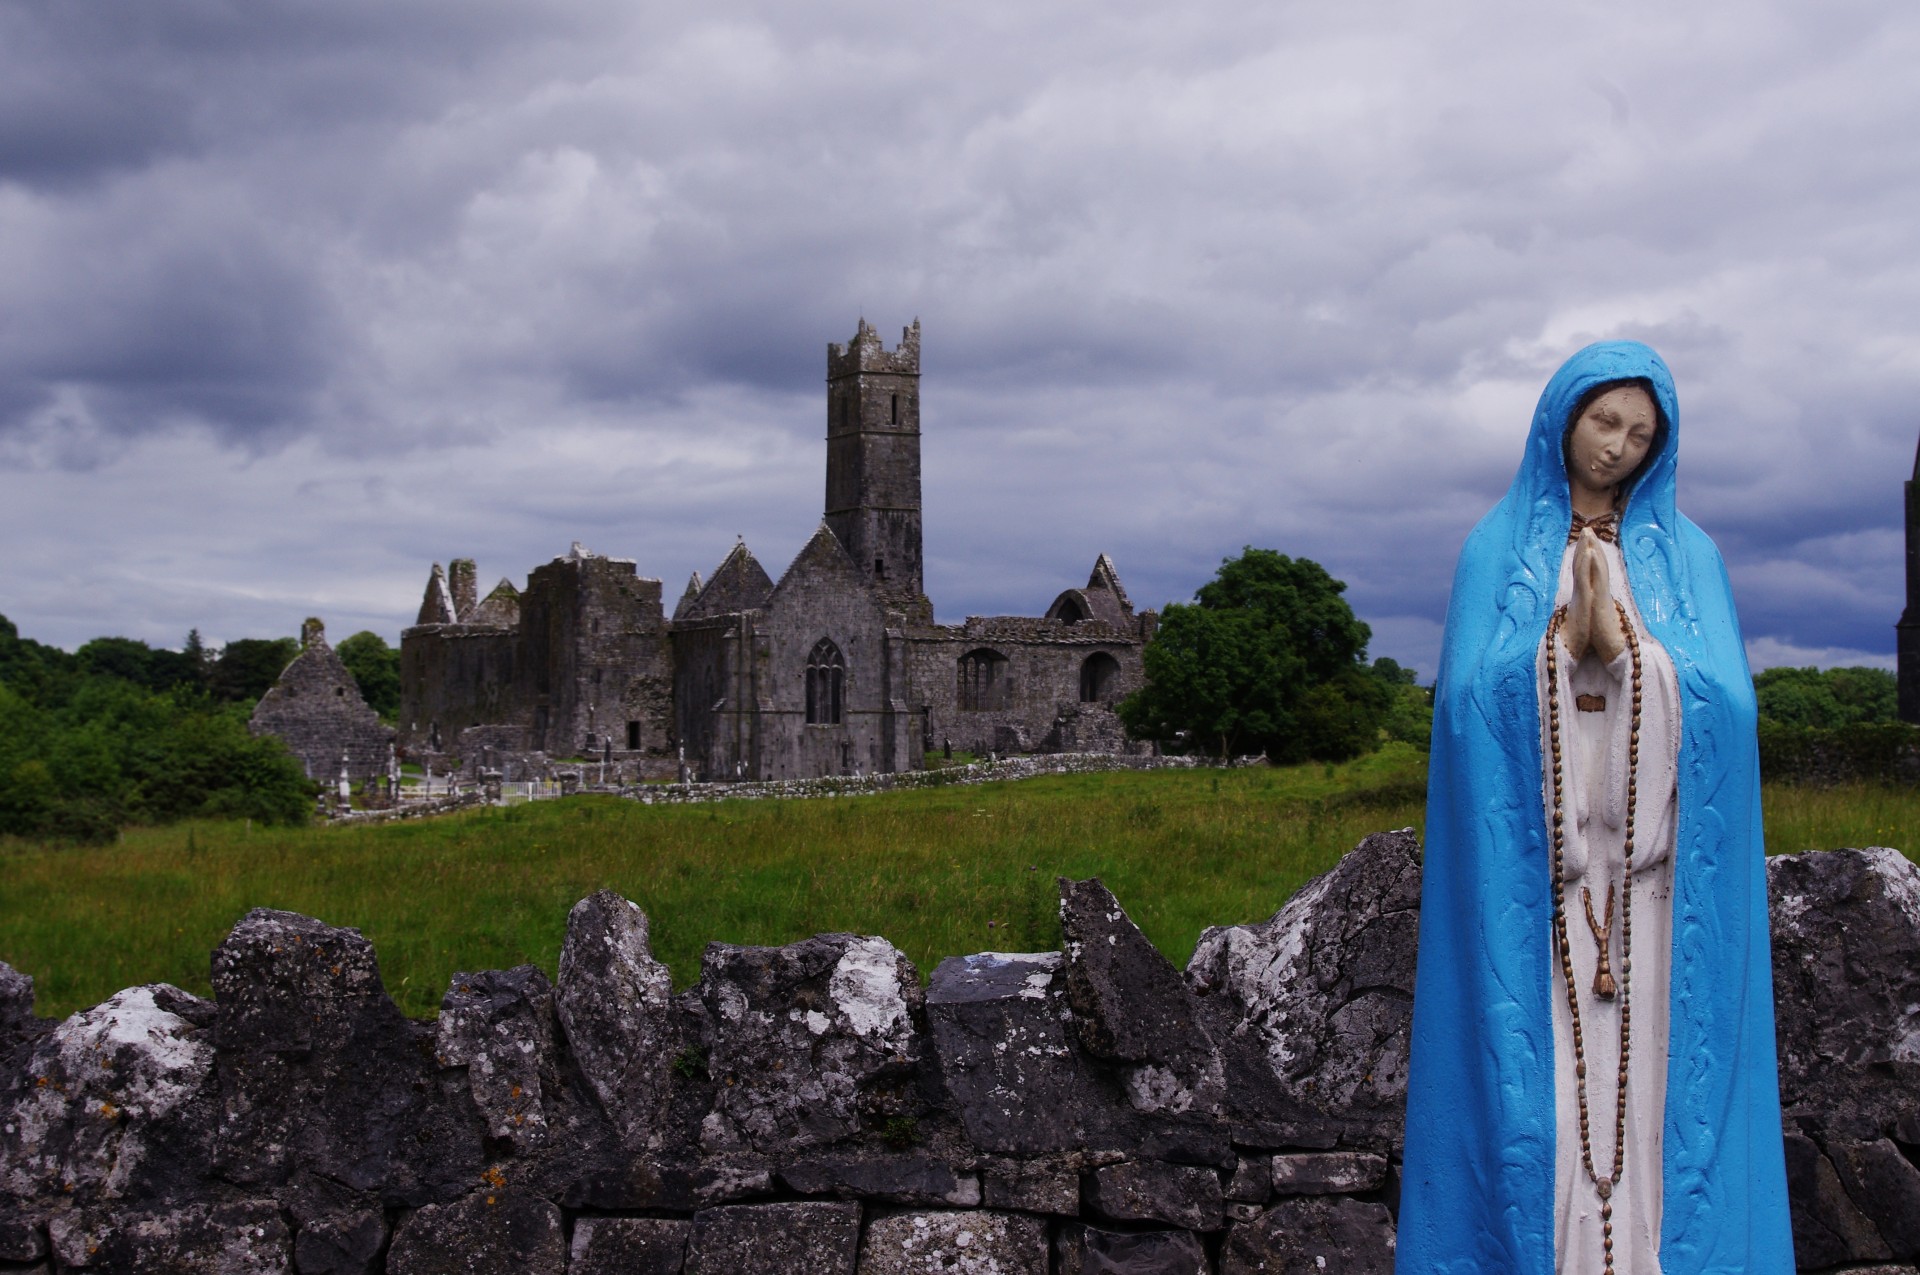 Statue of Mother Mary praying in front of Irish church ruin (Quin, County Clare, Ireland)